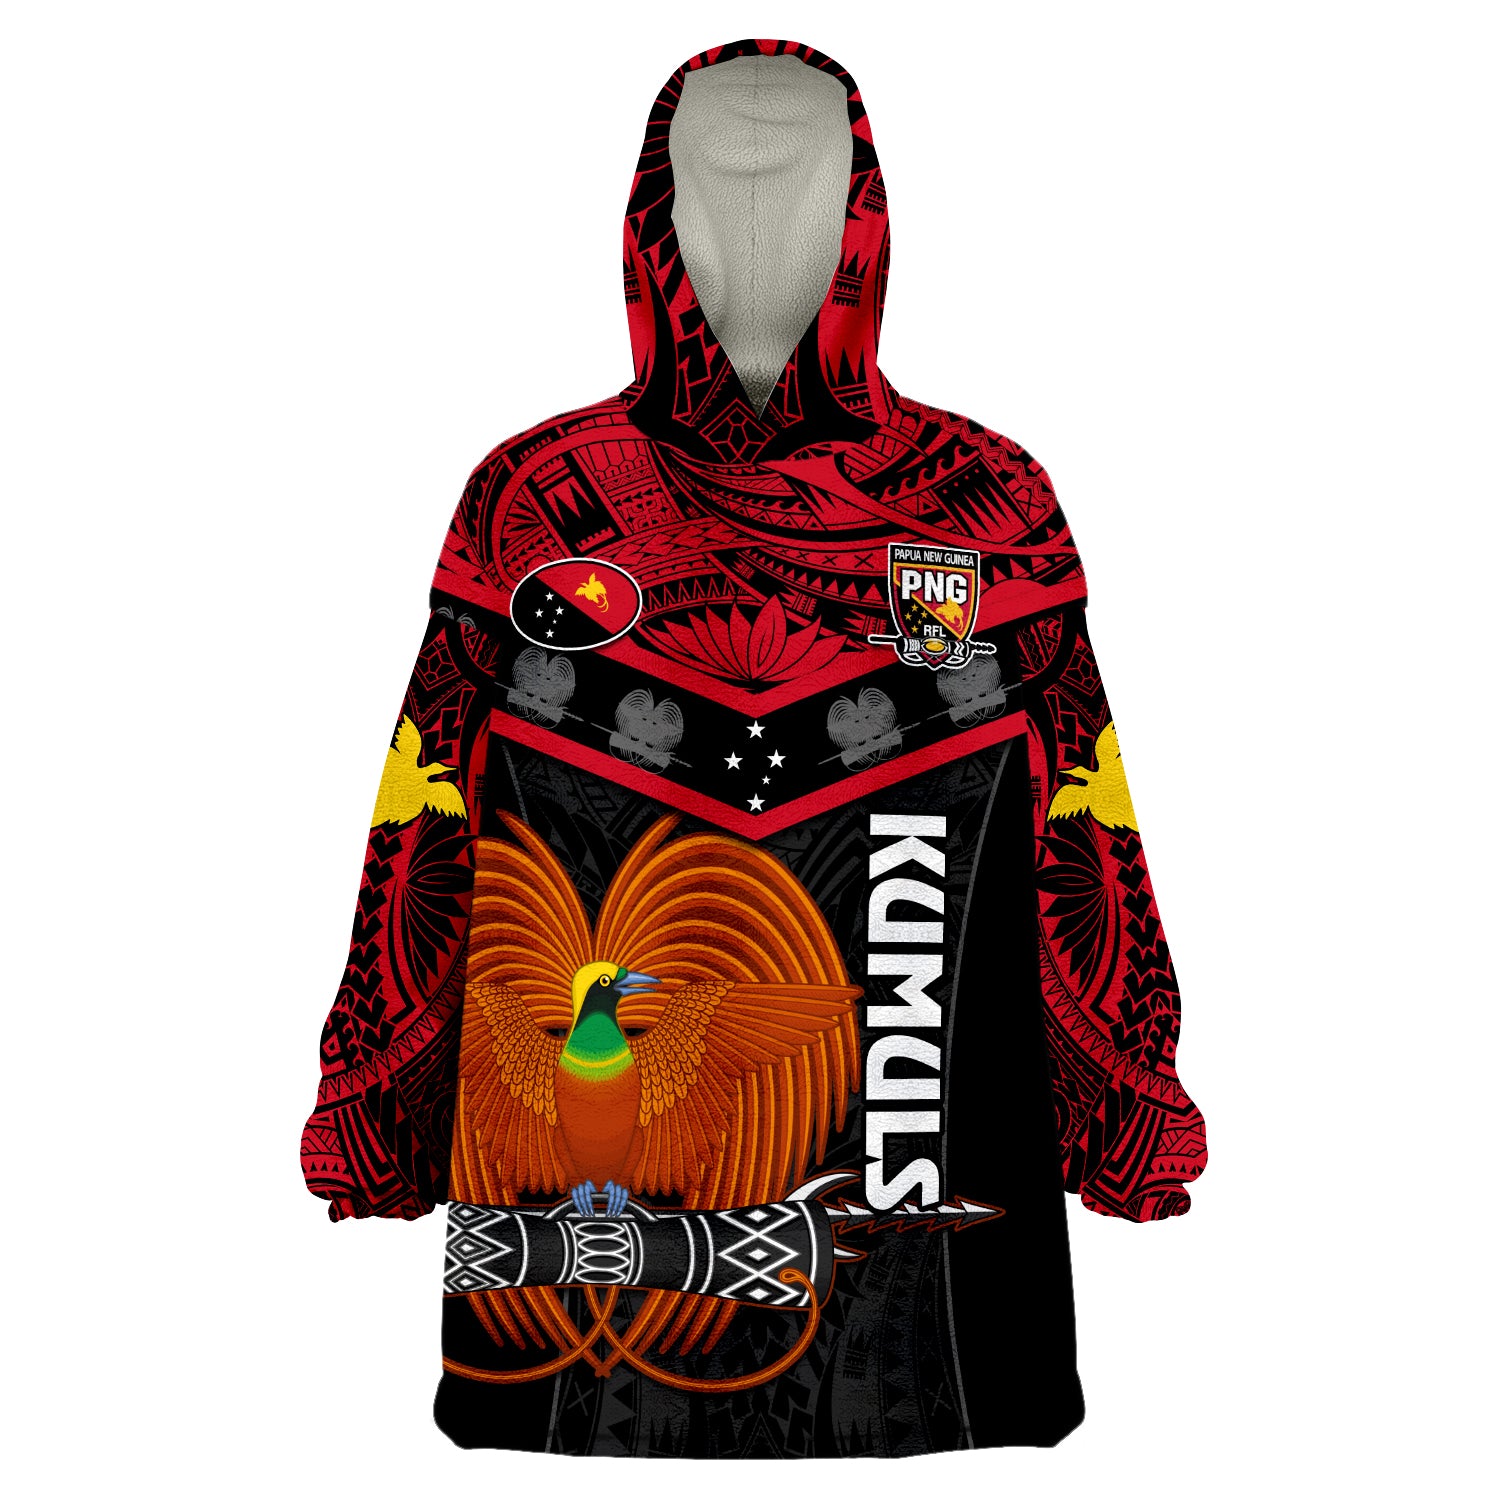 (Custom Text And Number) Papua New Guinea Rugby PNG Kumuls Bird Of Paradise Black Wearable Blanket Hoodie LT14 Unisex One Size - Polynesian Pride